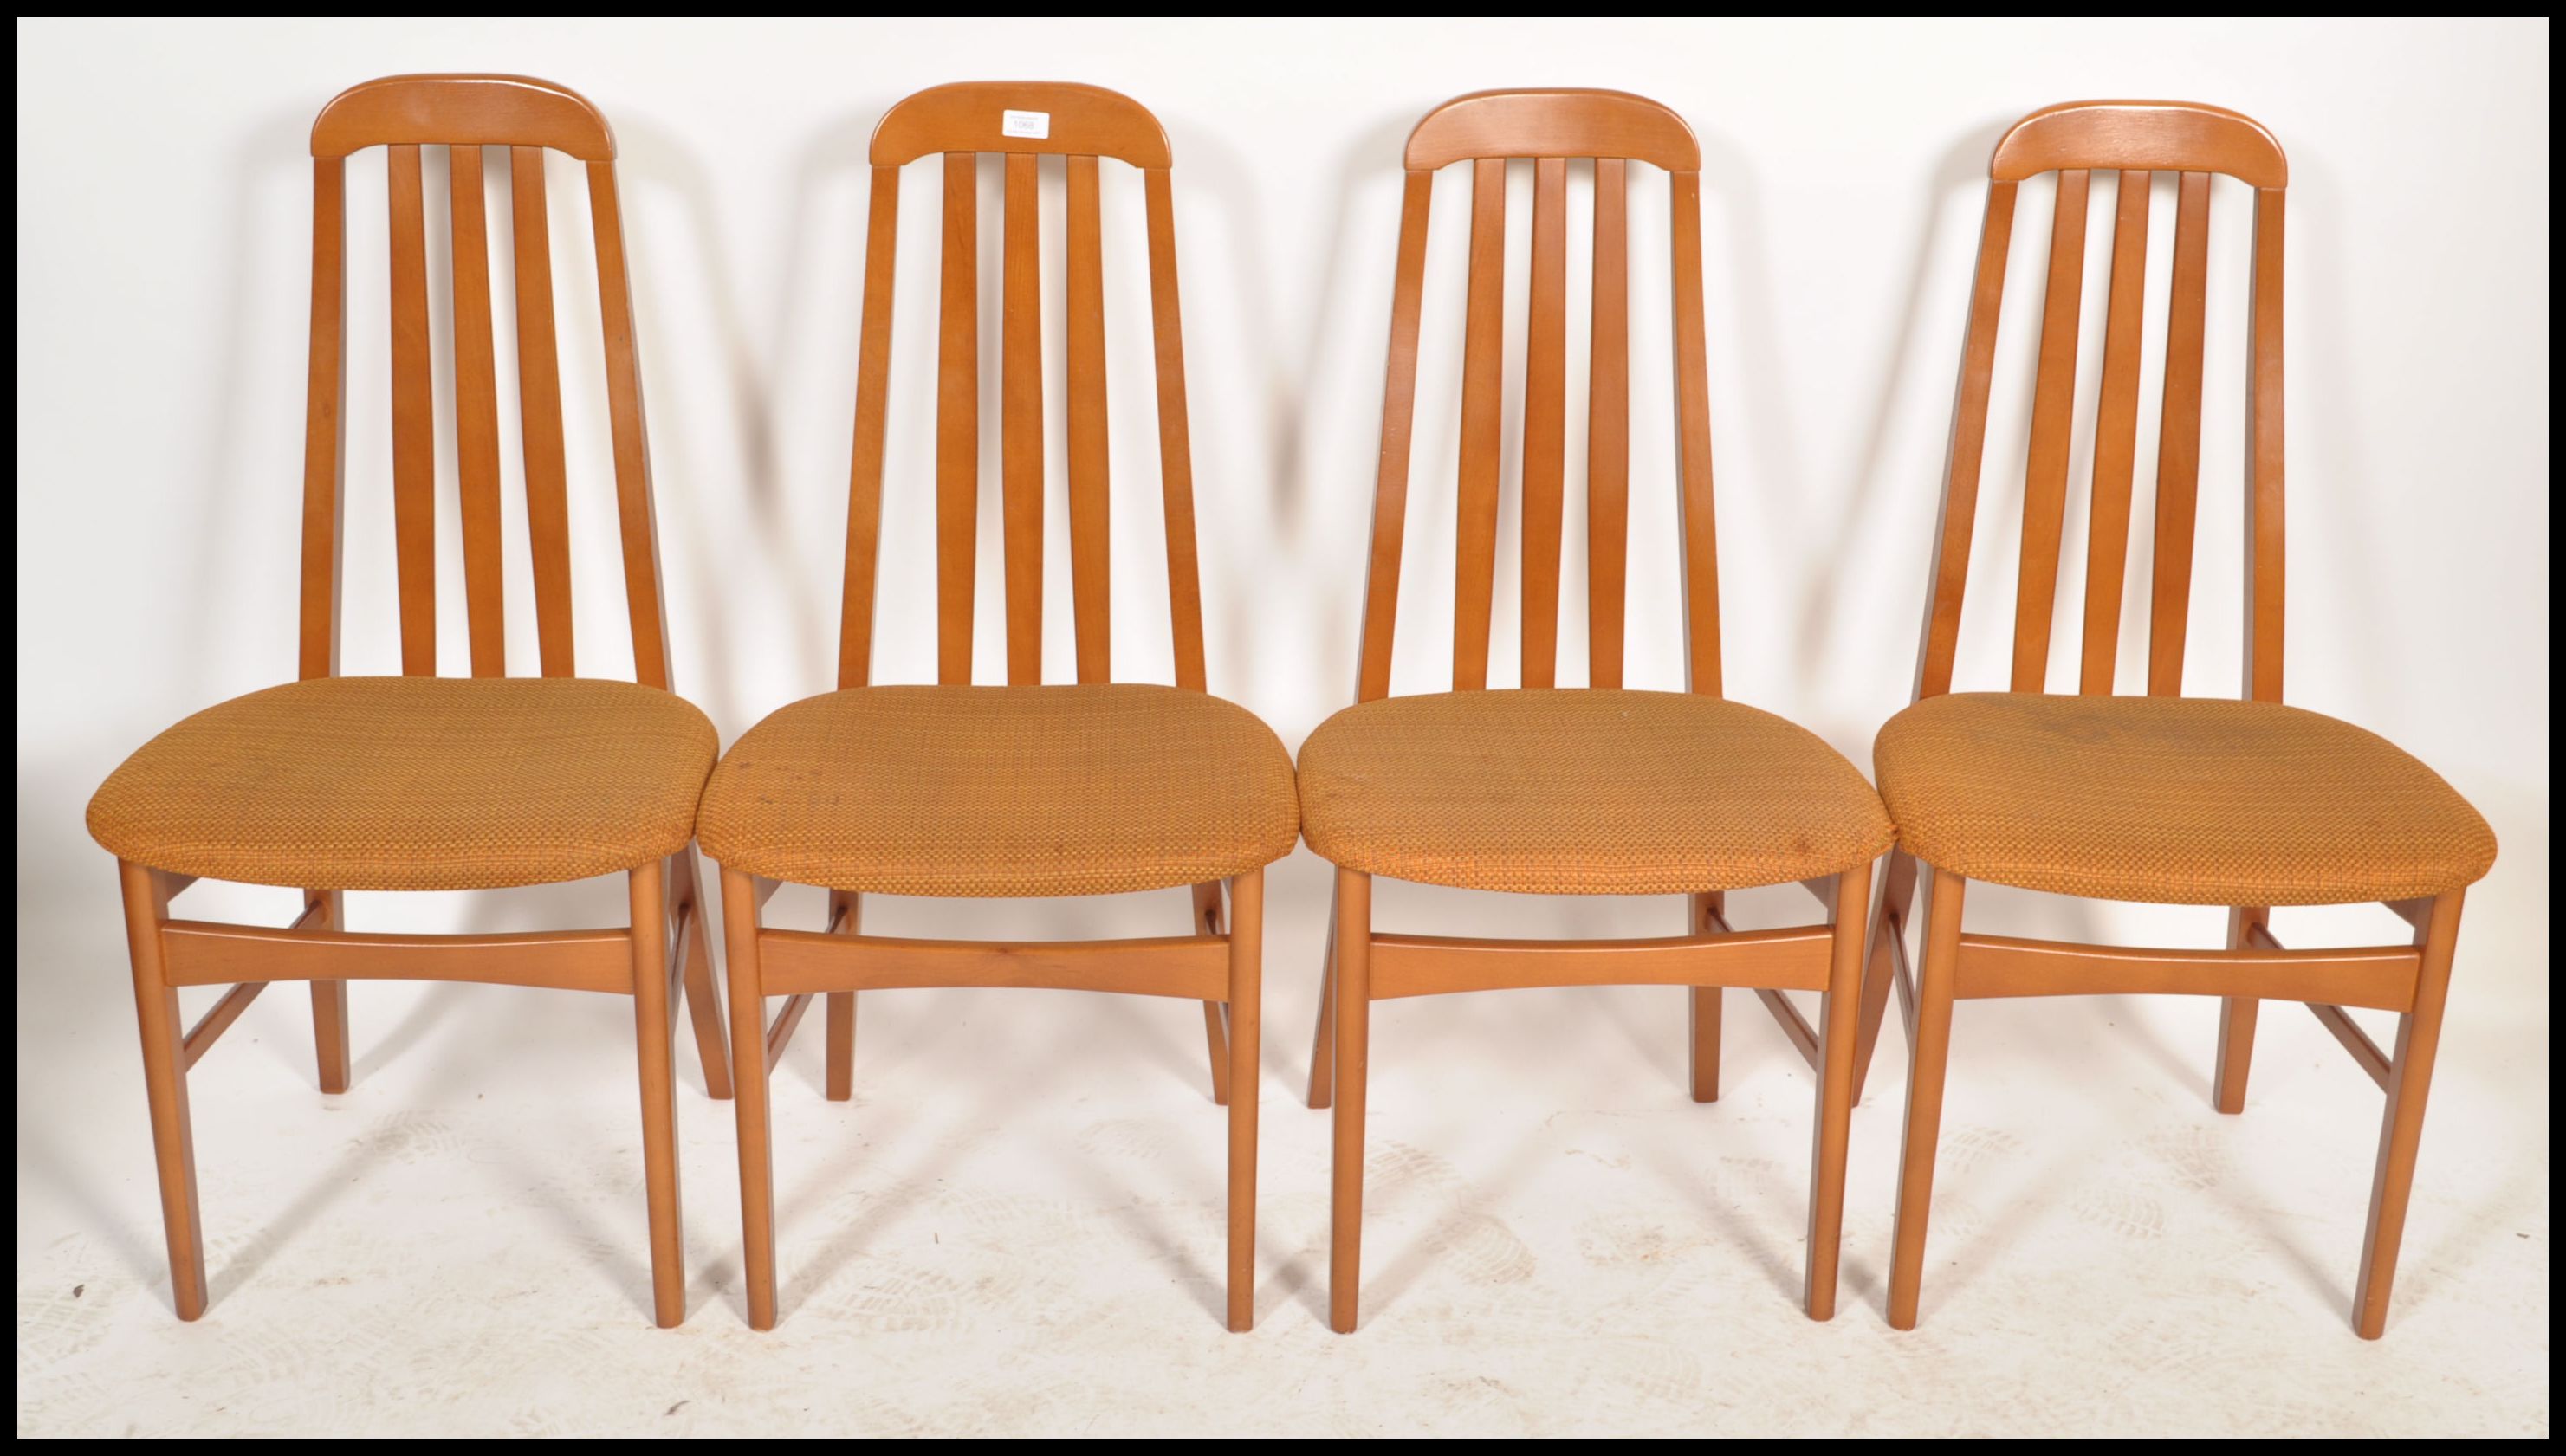 A set of 4 20th century Nathan furniture dining chairs in teak being raised on tapering legs with - Image 2 of 4